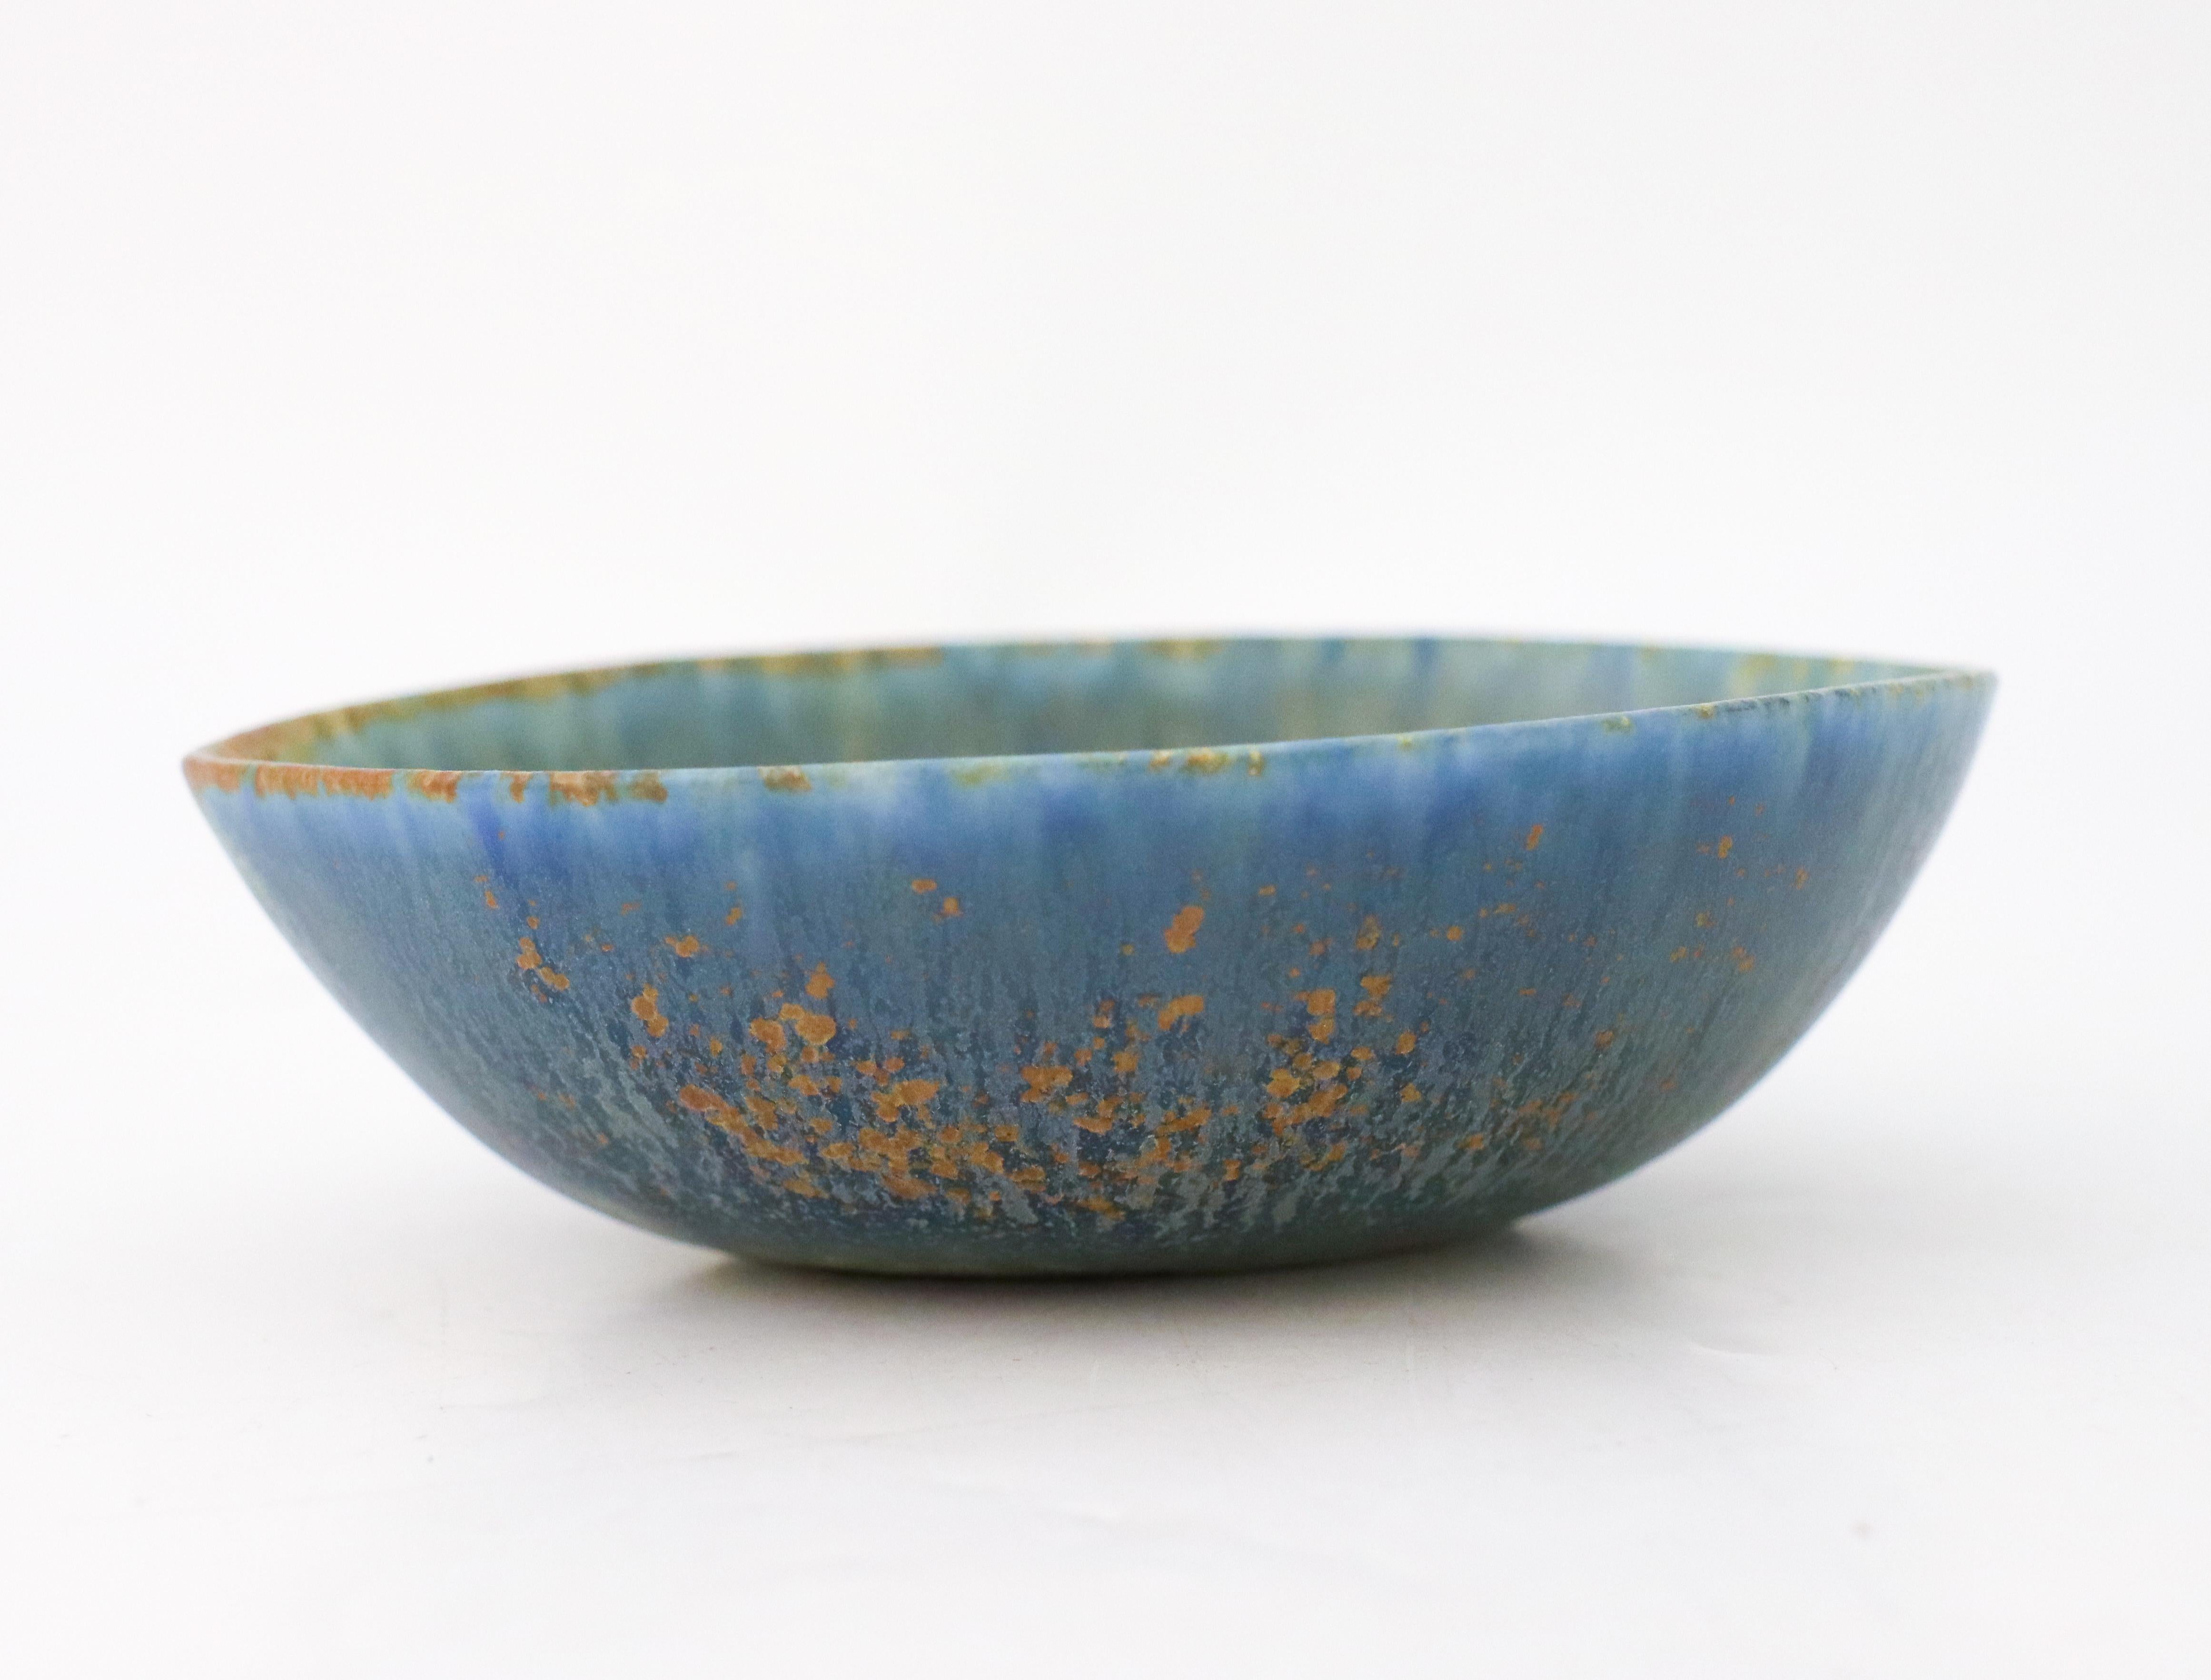 A lovely blue bowl designed by Carl-Harry Stålhane at Rörstrand, the bowl is 14 x 11 cm in diameter. It is in excellent condition and marked as 1st quality. 

Carl-Harry Stålhane is one of the top names when it comes to Mid century Scandinavian